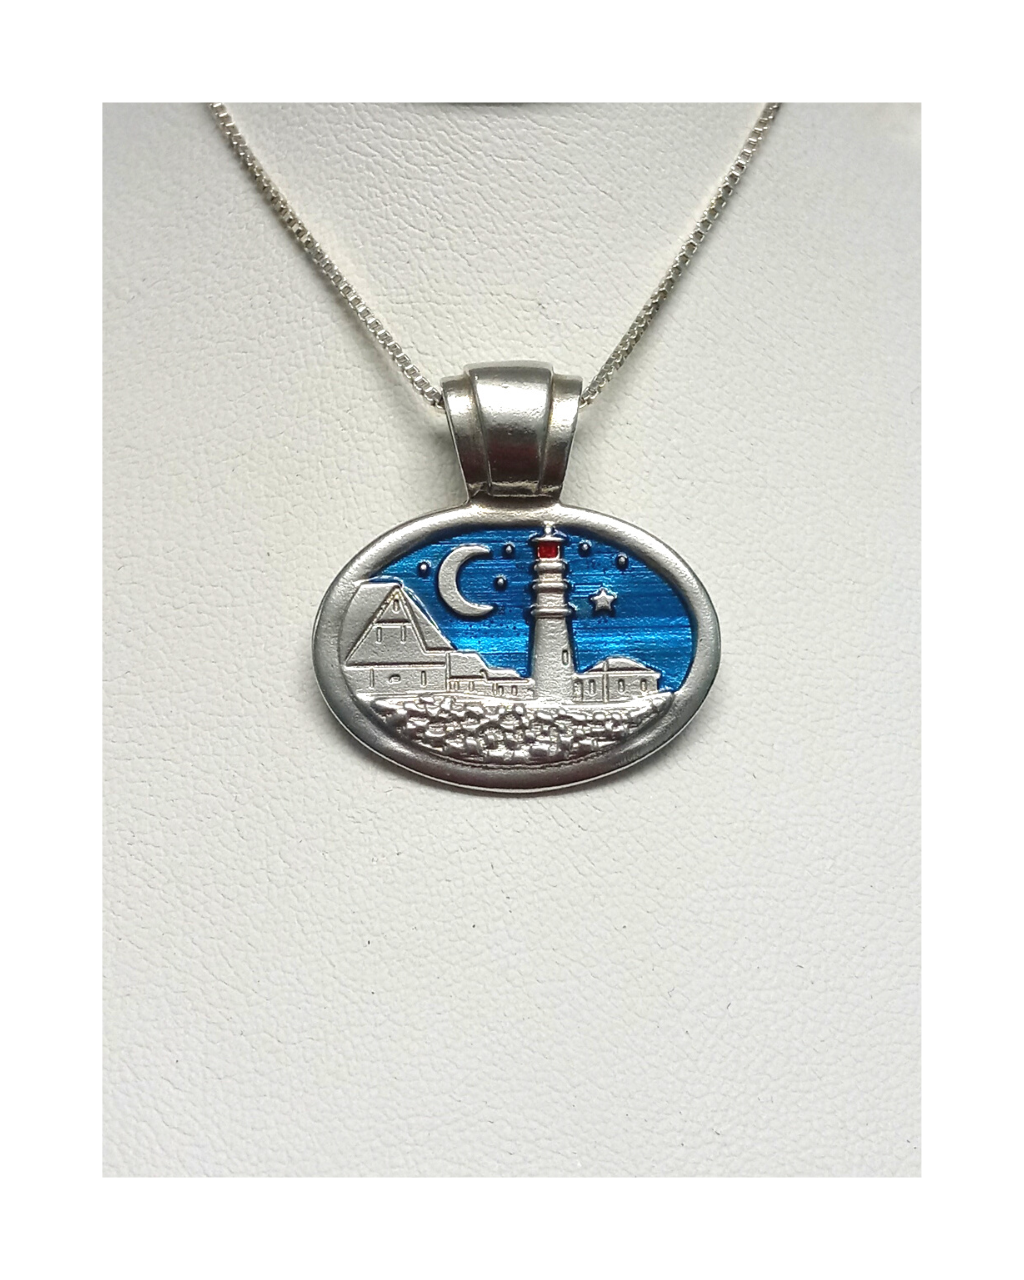 Exclusive Wearable Art Hand-enameled Beautiful Lighthouse Scene Removable Slide Pendant 1 1/8"L X 1 1/8"W Sterling Necklace on 18" Box Chain